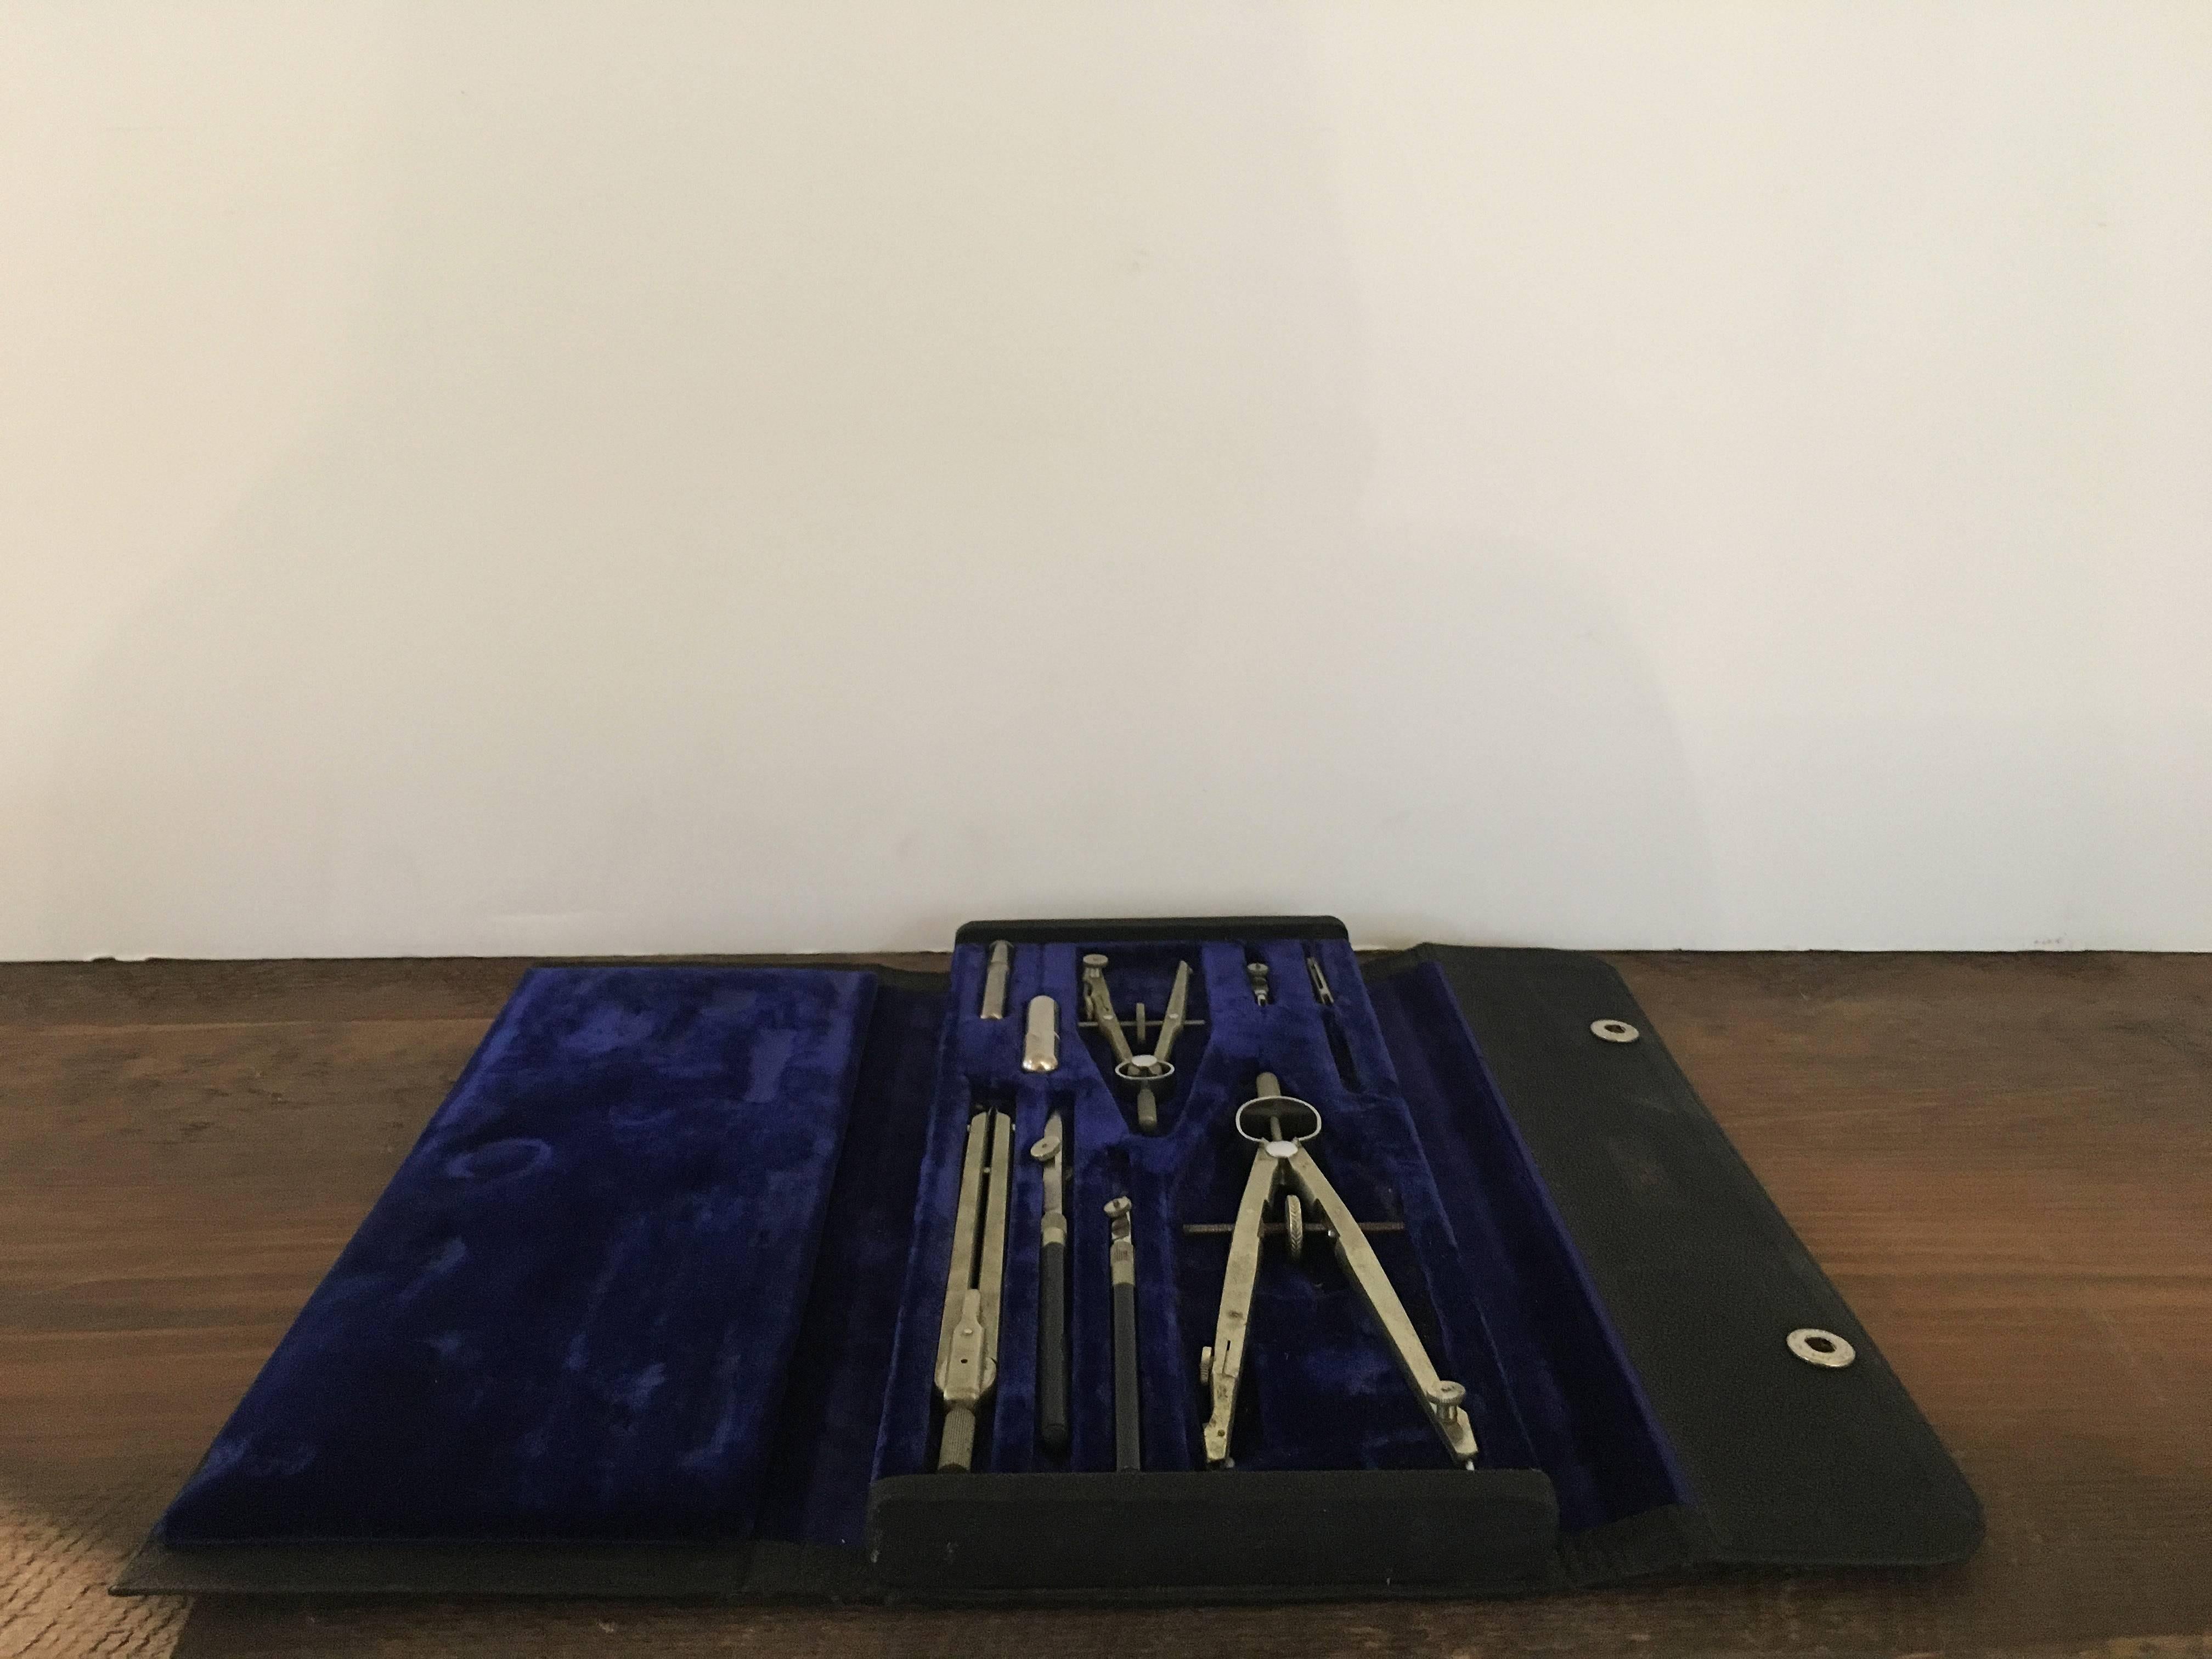 Vintage drafting tool kit with blue velvet interior.

Snaps closed; from Keuffel and Esser, the first American company in US to specialize in drafting and drawing tools, founded in 1867, based in New York.